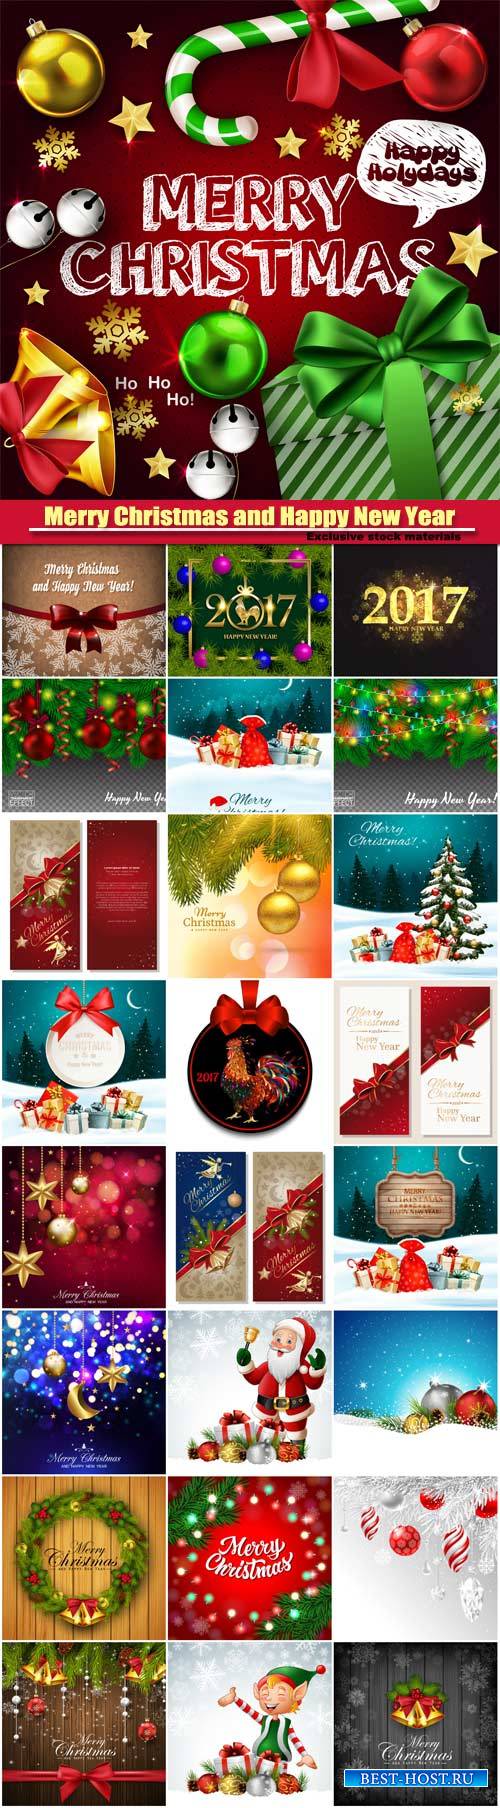 Merry Christmas and Happy New Year vector, greeting cards, leaflets and bro ...